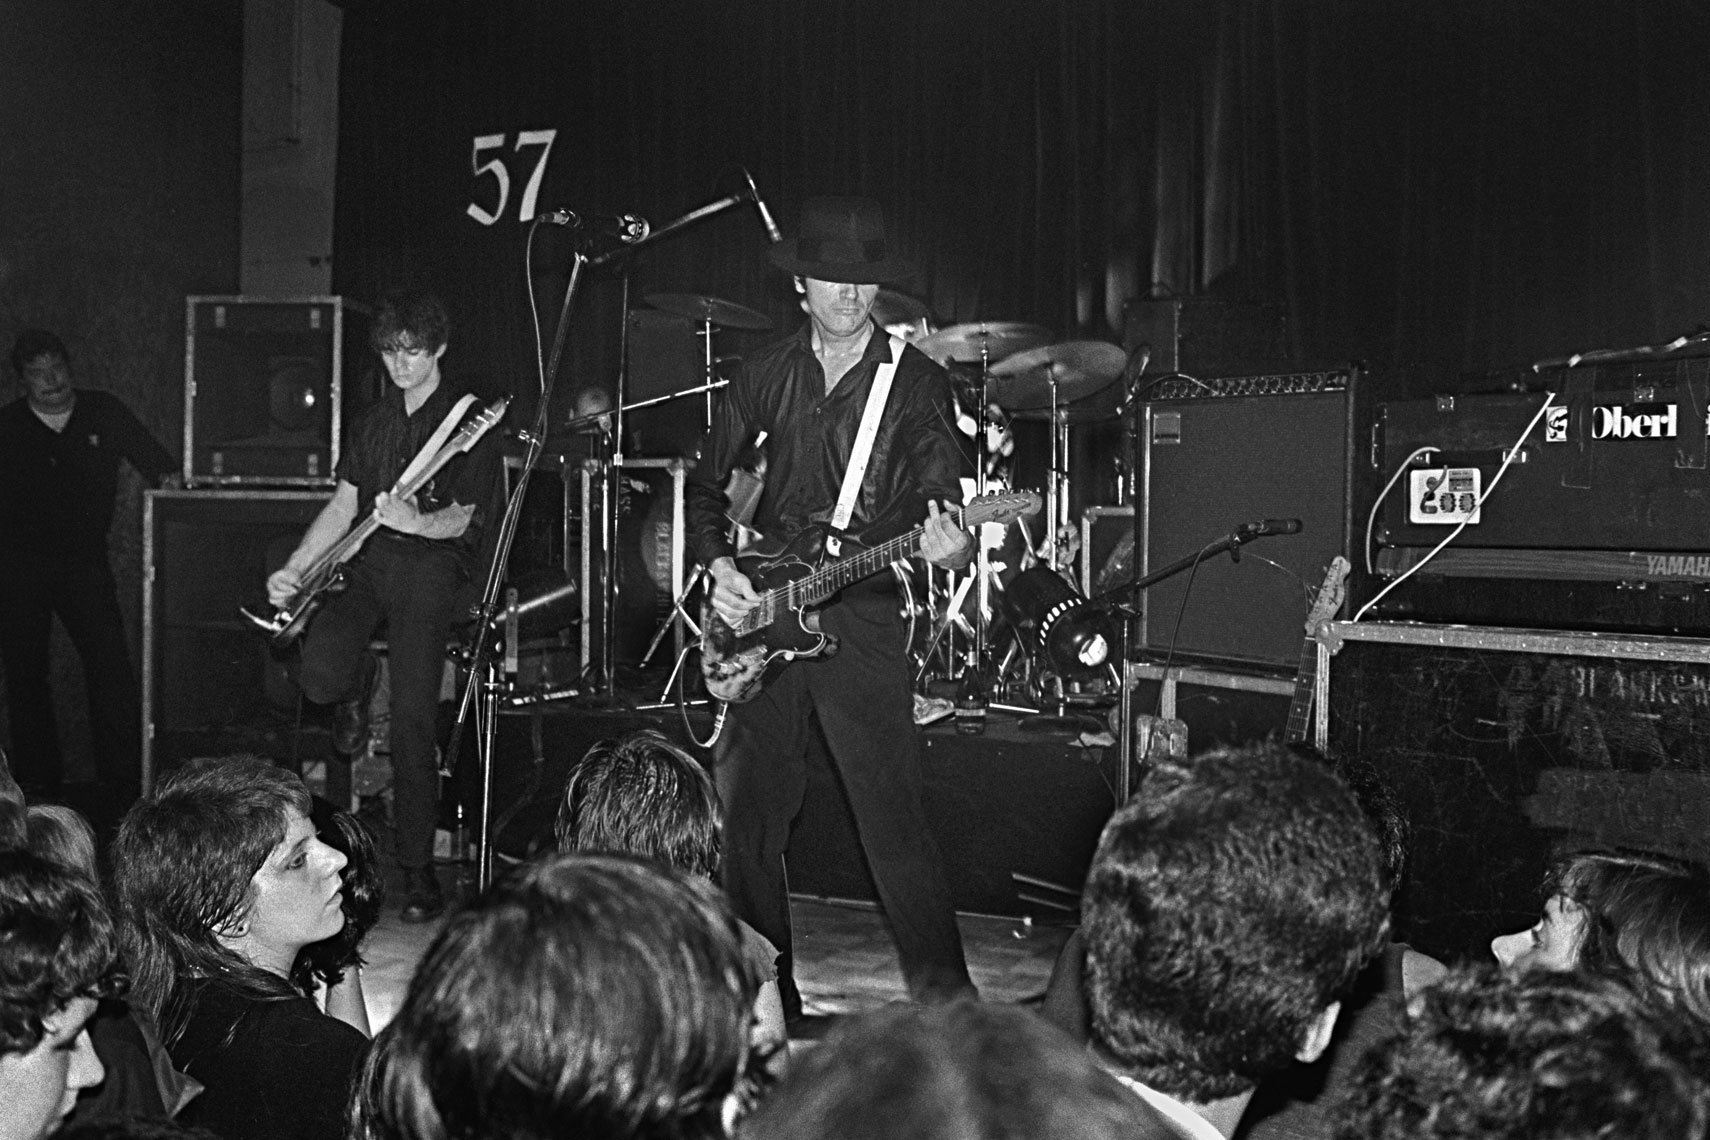 119_126_066_Irving-Plaza_The-Stranglers_a